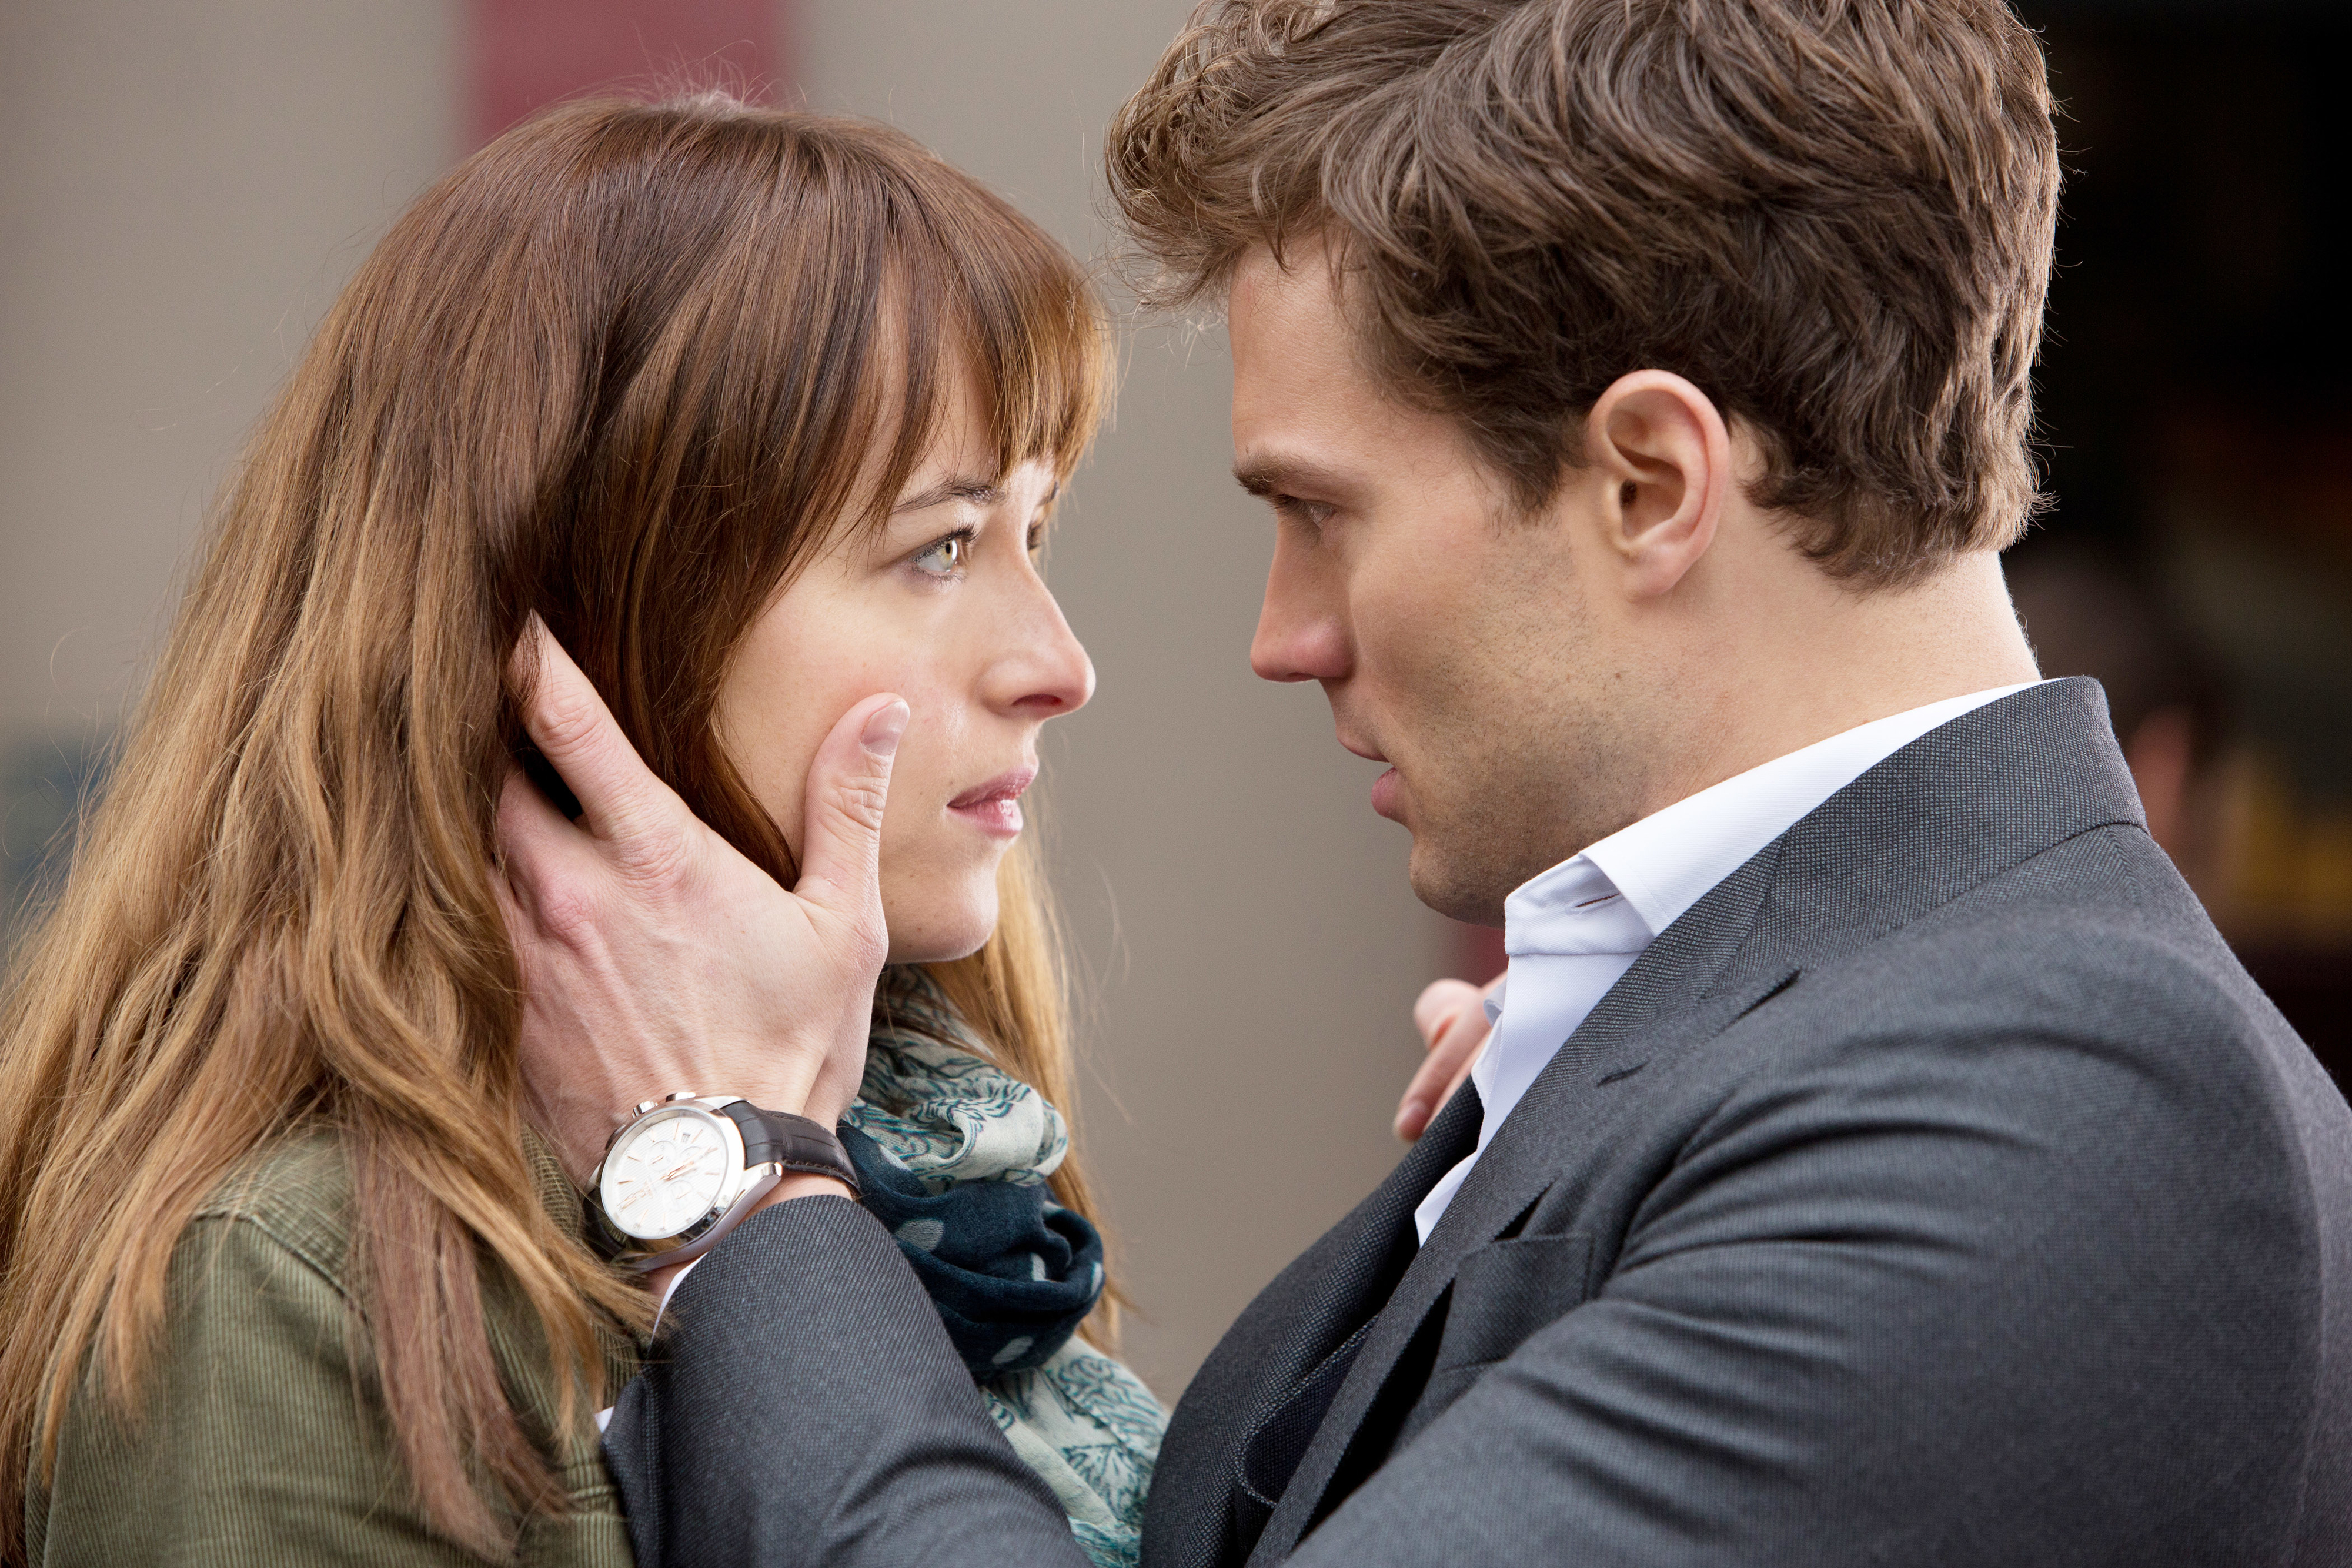 Anastasia Steele and Christian Grey stand close in a scene from Fifty Shades of Grey